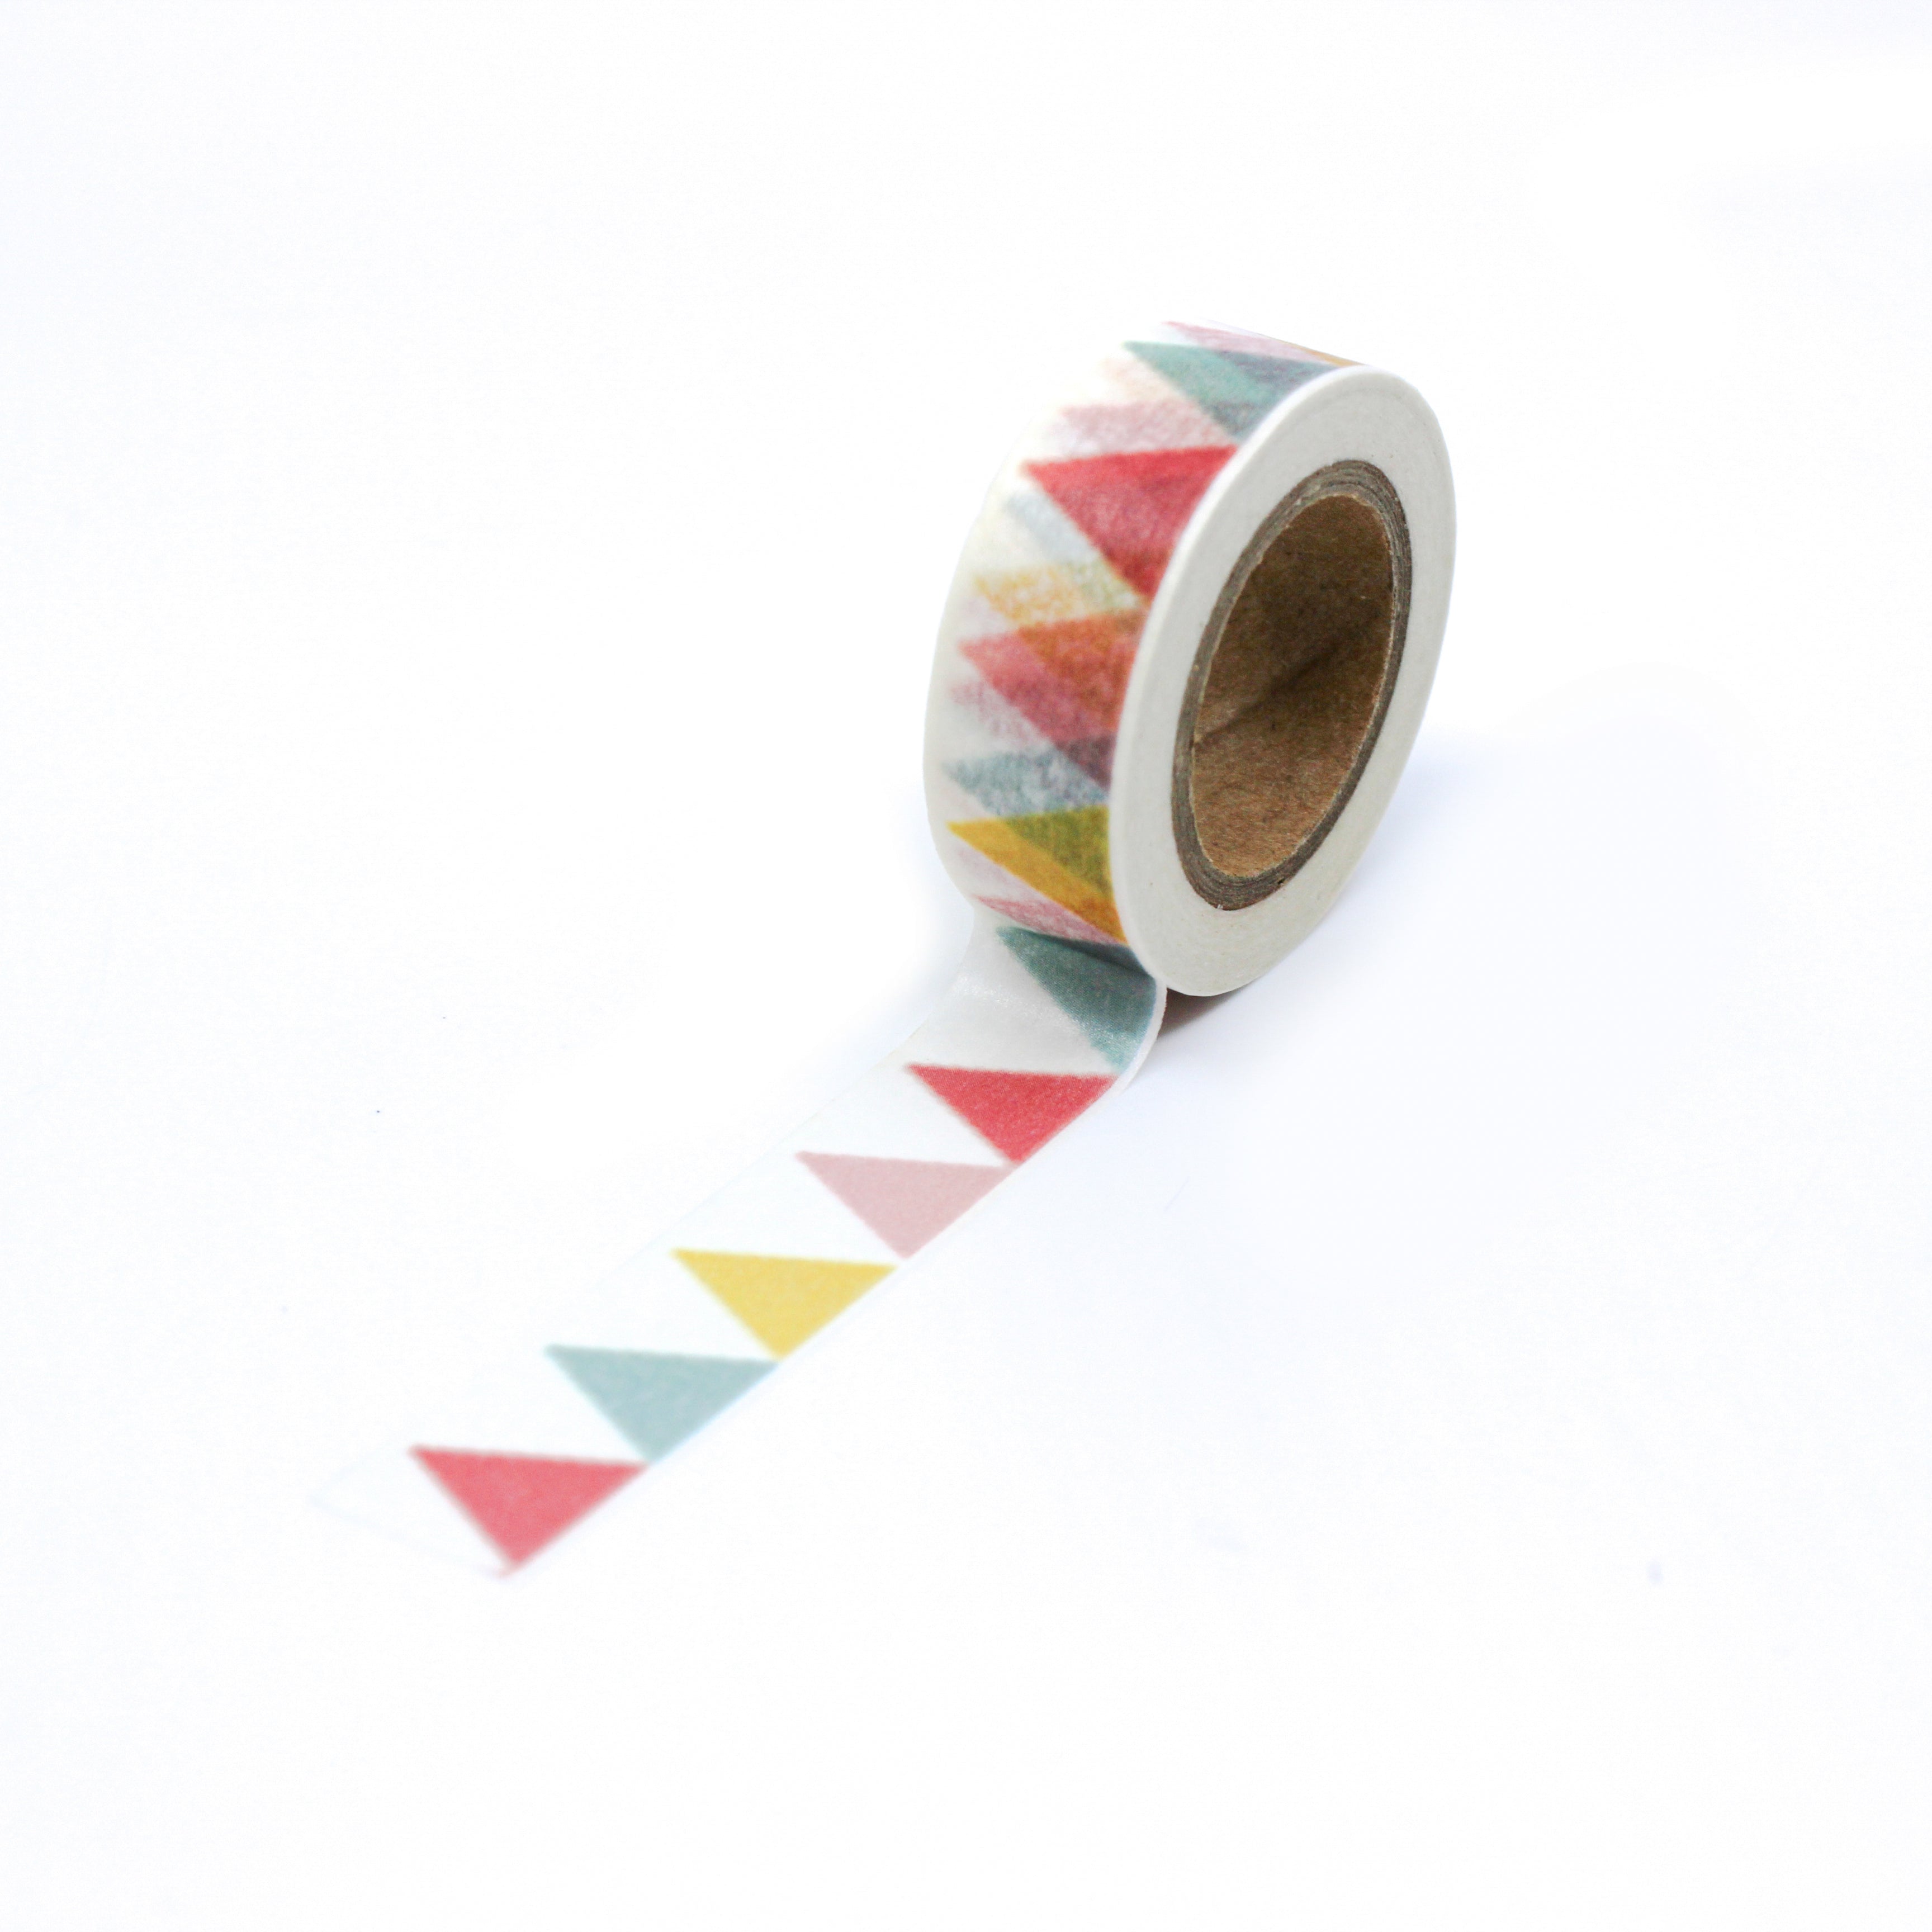 This is a full pattern repeat view of variety of colors multi-strung triangles washi tape from BBB Supplies Craft Shop